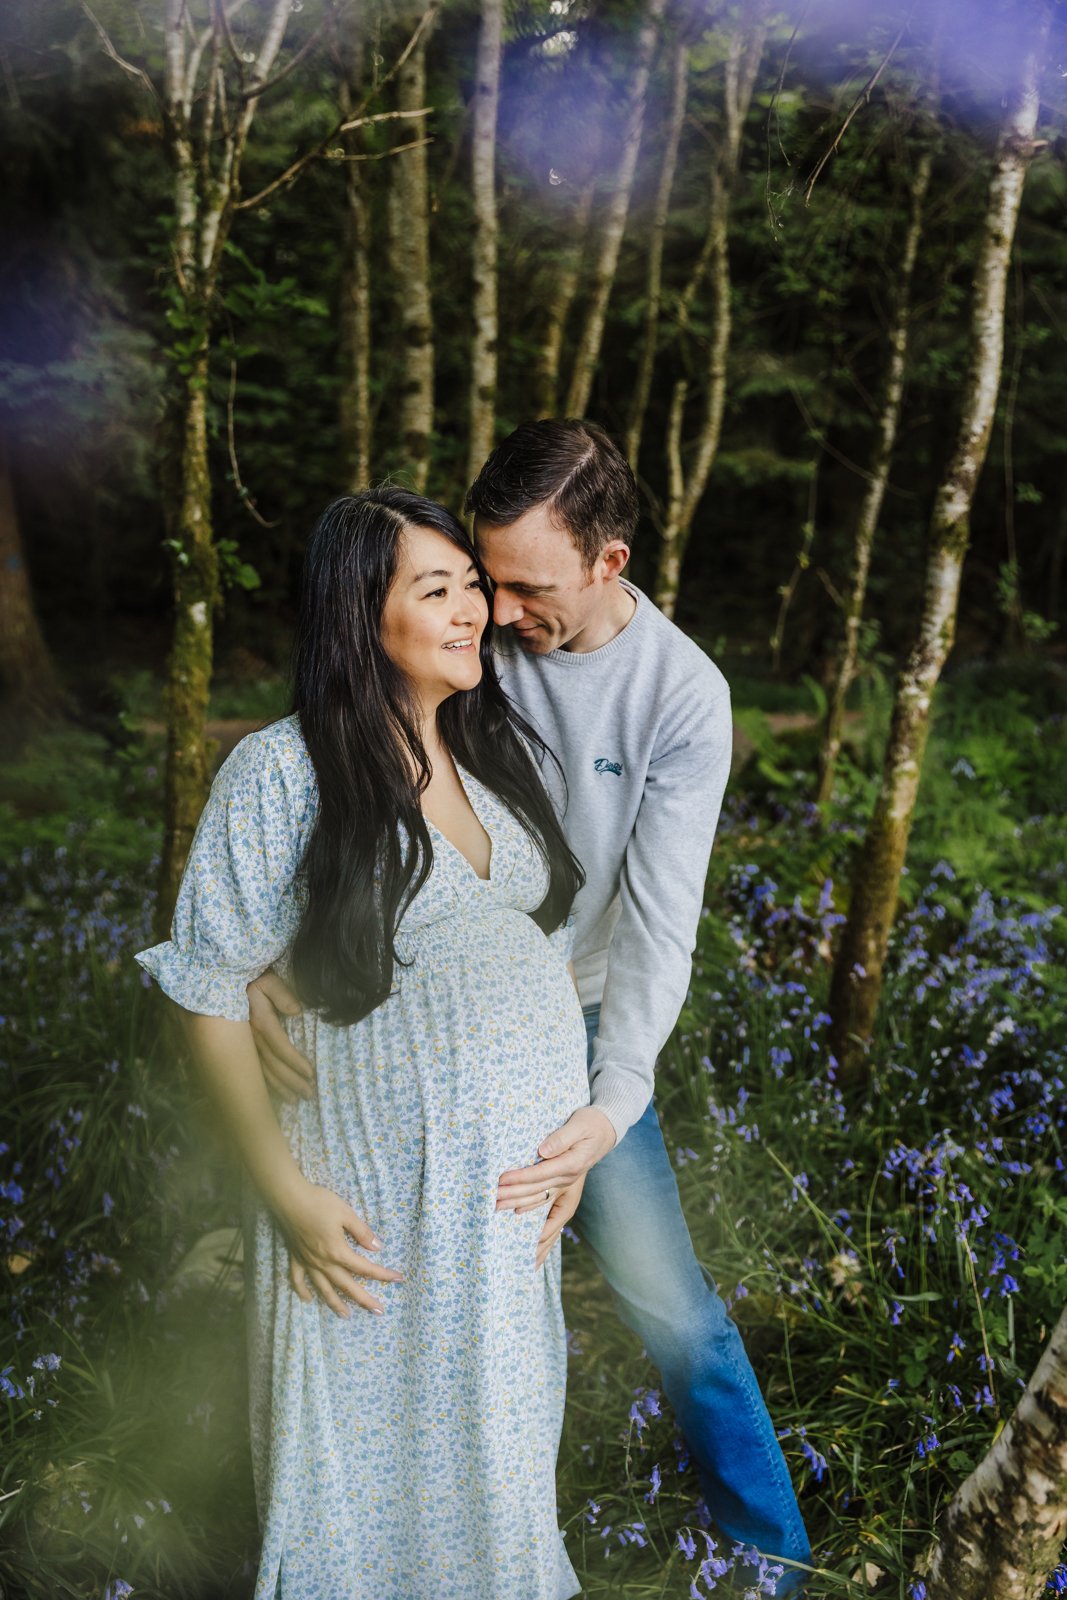 Pregnant Woman + Husband in forrest with bluebells